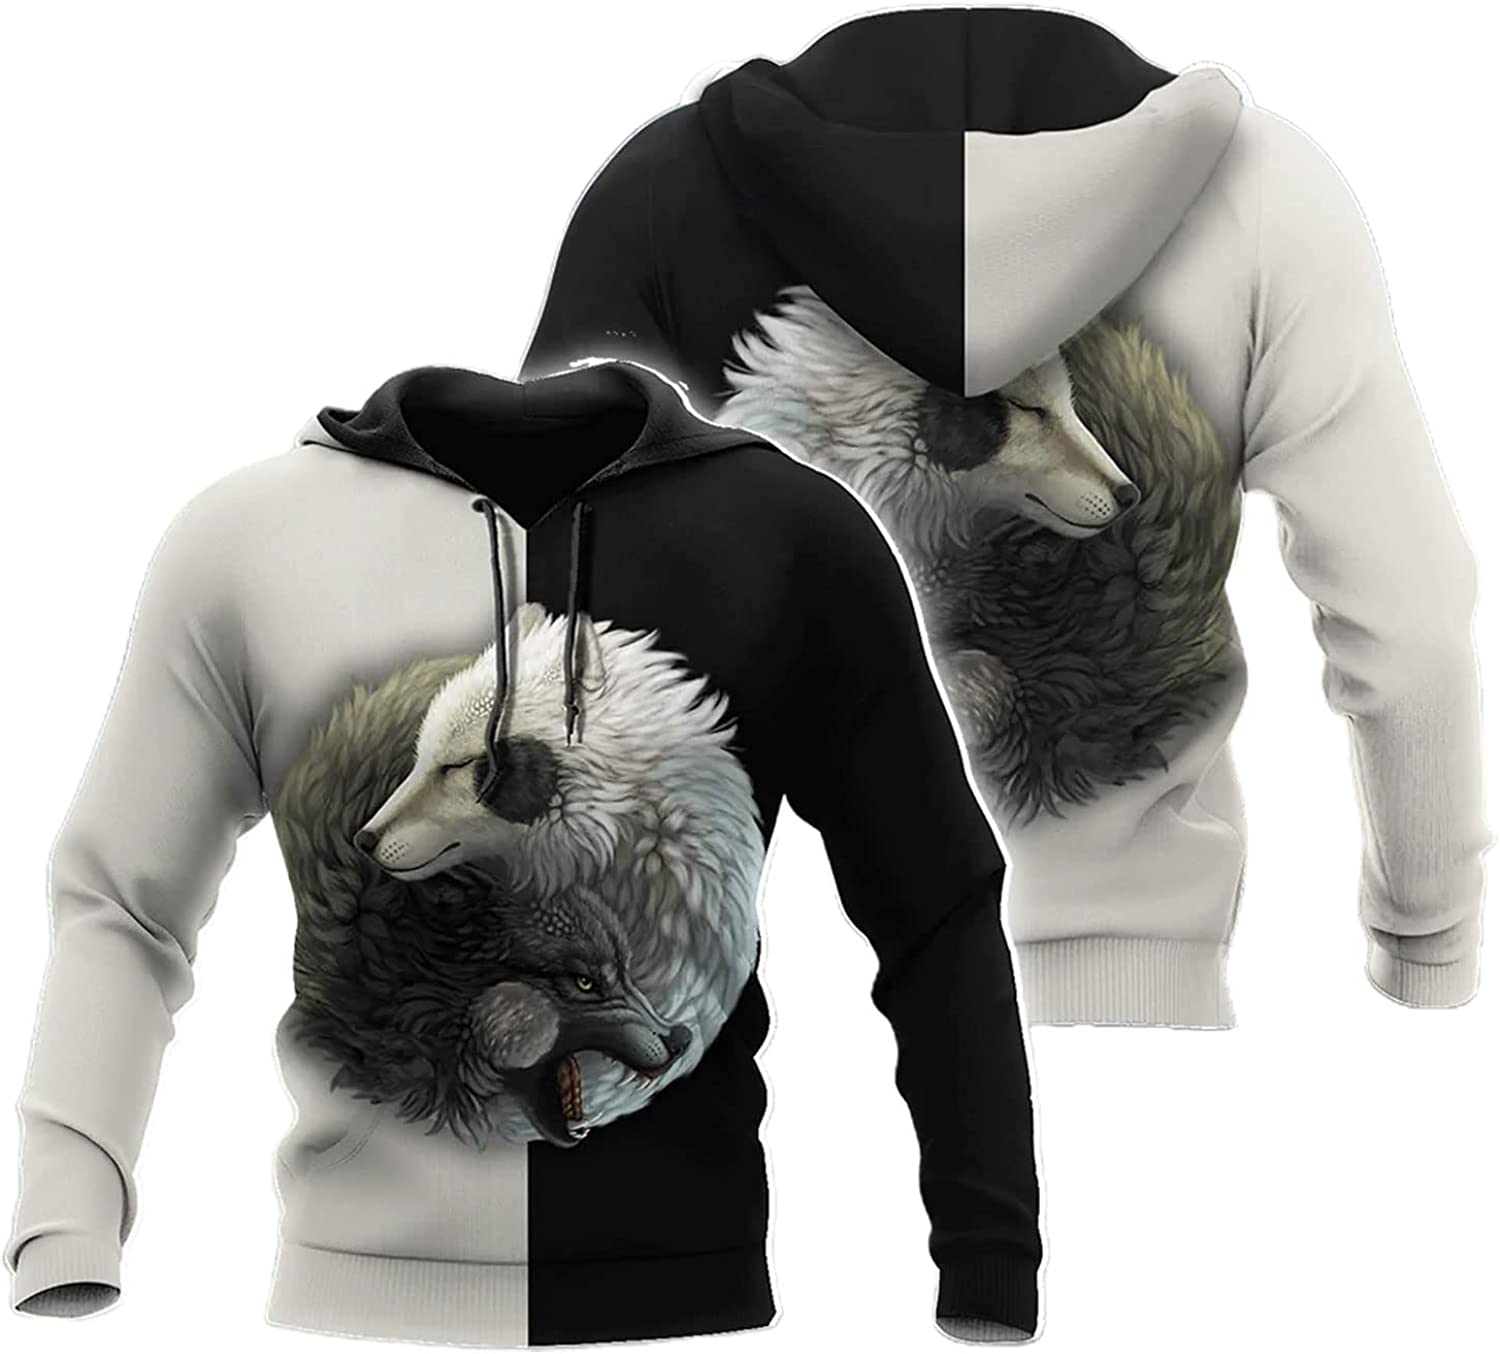 wolf yin %26 yang 3d hoodie with all over print perfect for winter and wolf lovers ideal gift for hunting enthusiasts and family available in pullover hoodie hawaiian shirt and sweatshirt varian o7ywg